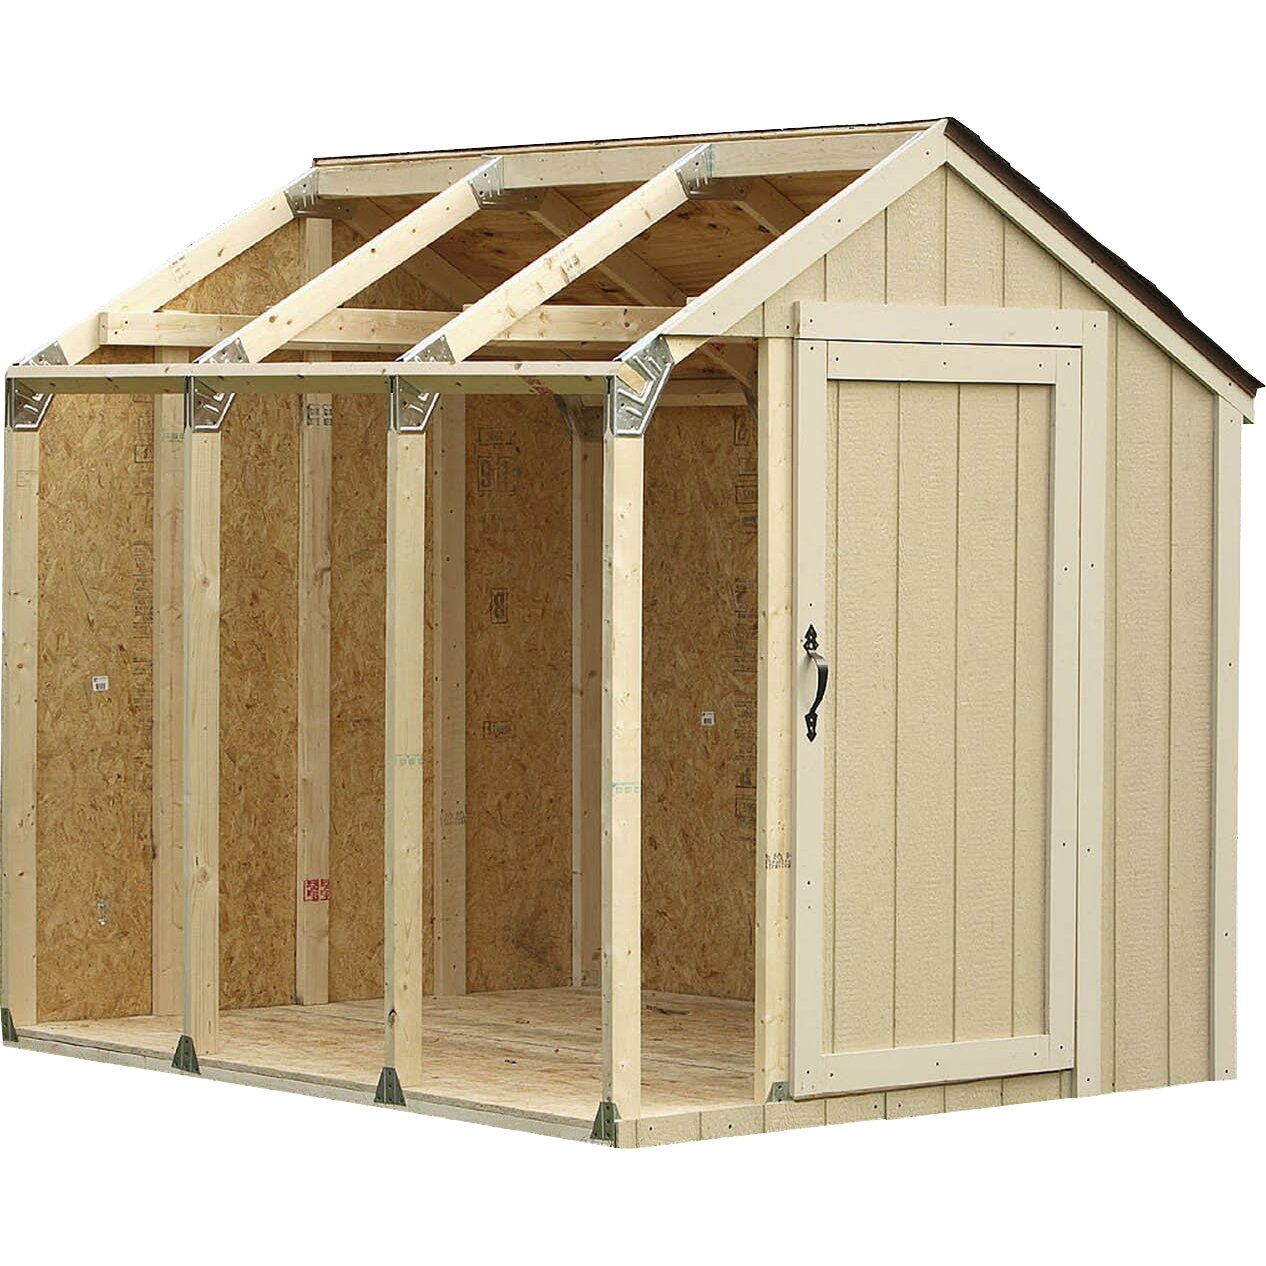 Hopkins Shed Kit With Peak Roof 90192 